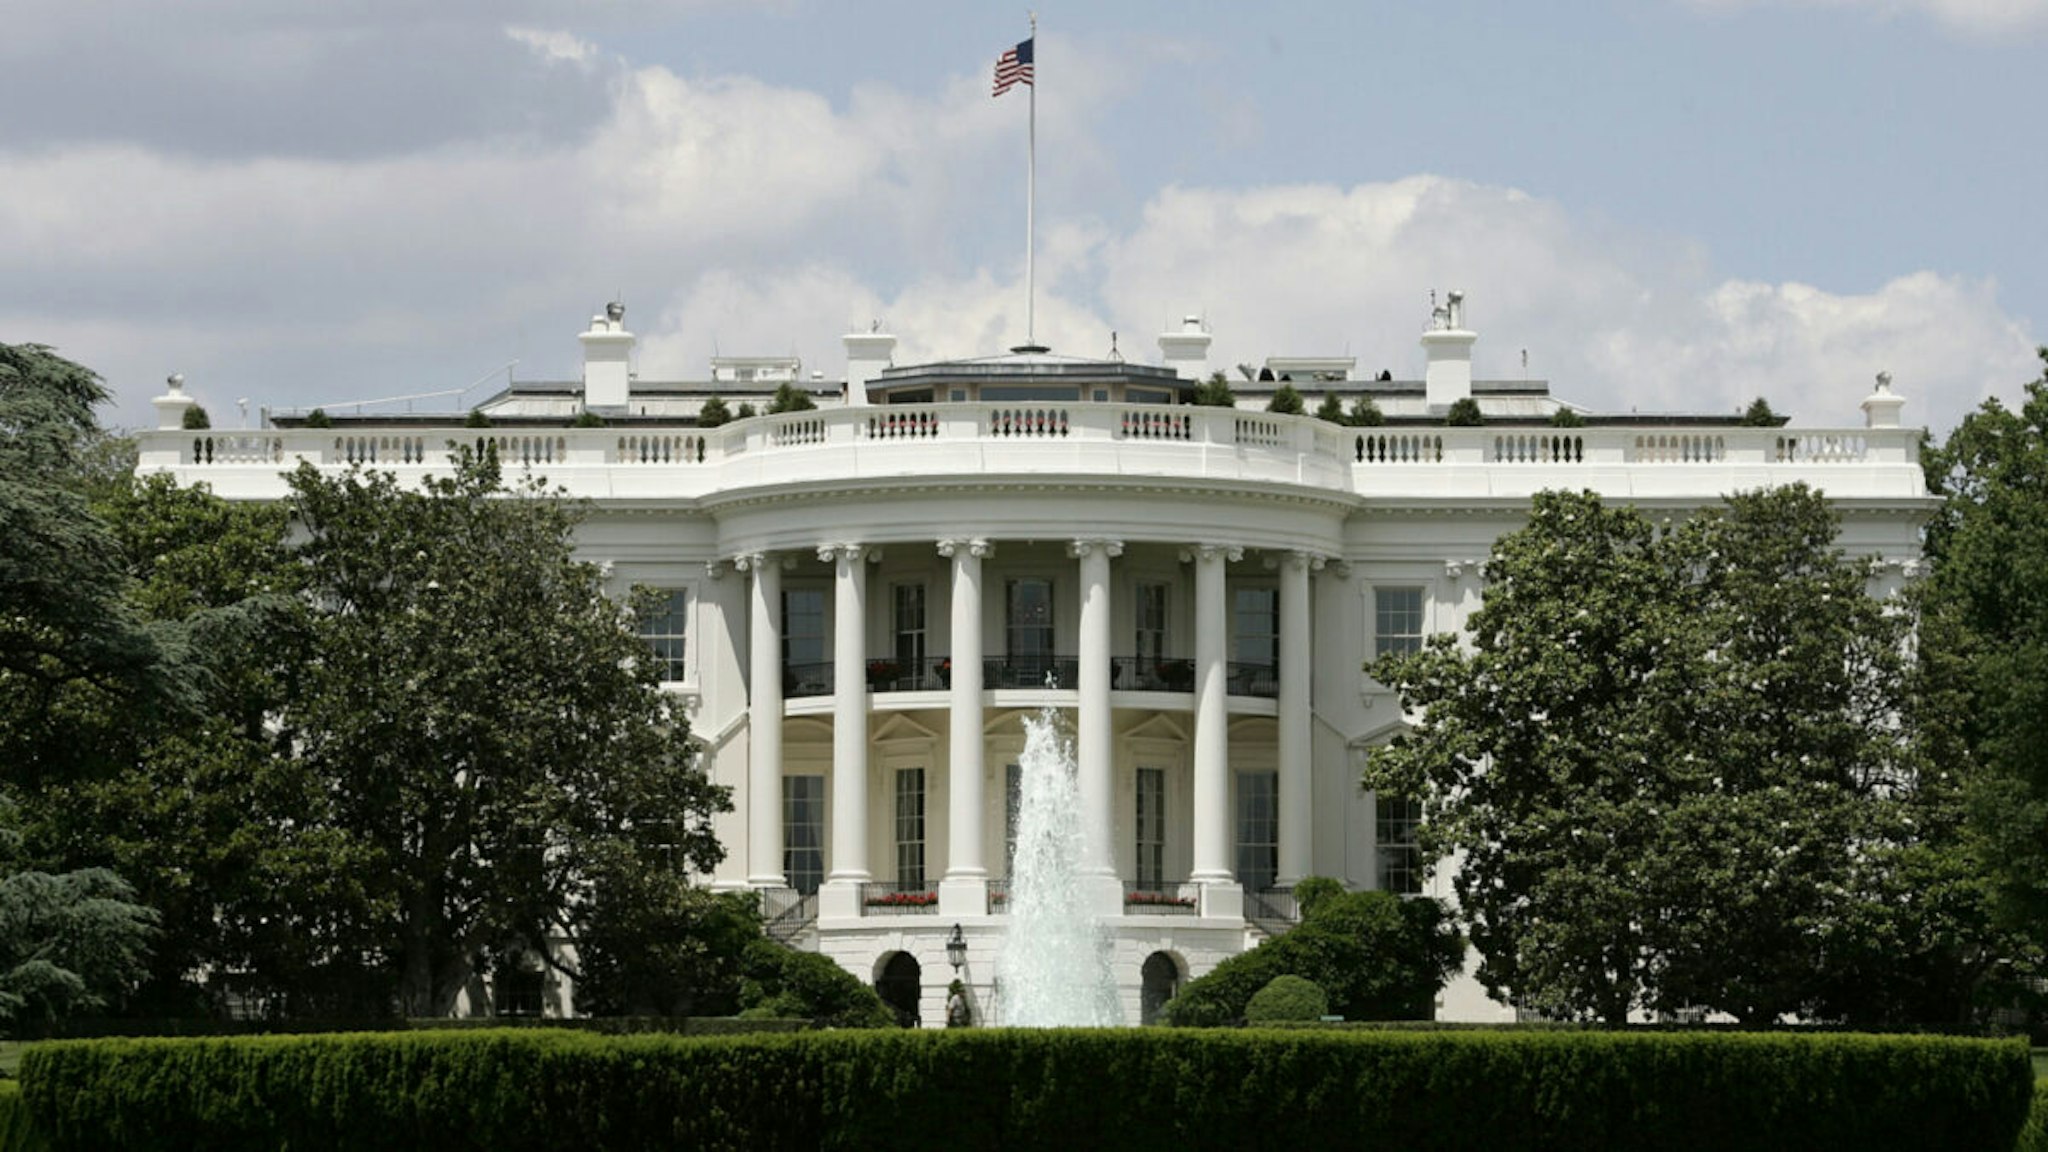 The exterior view of the south side of the White House is seen May 31, 2005 in Washington, DC.